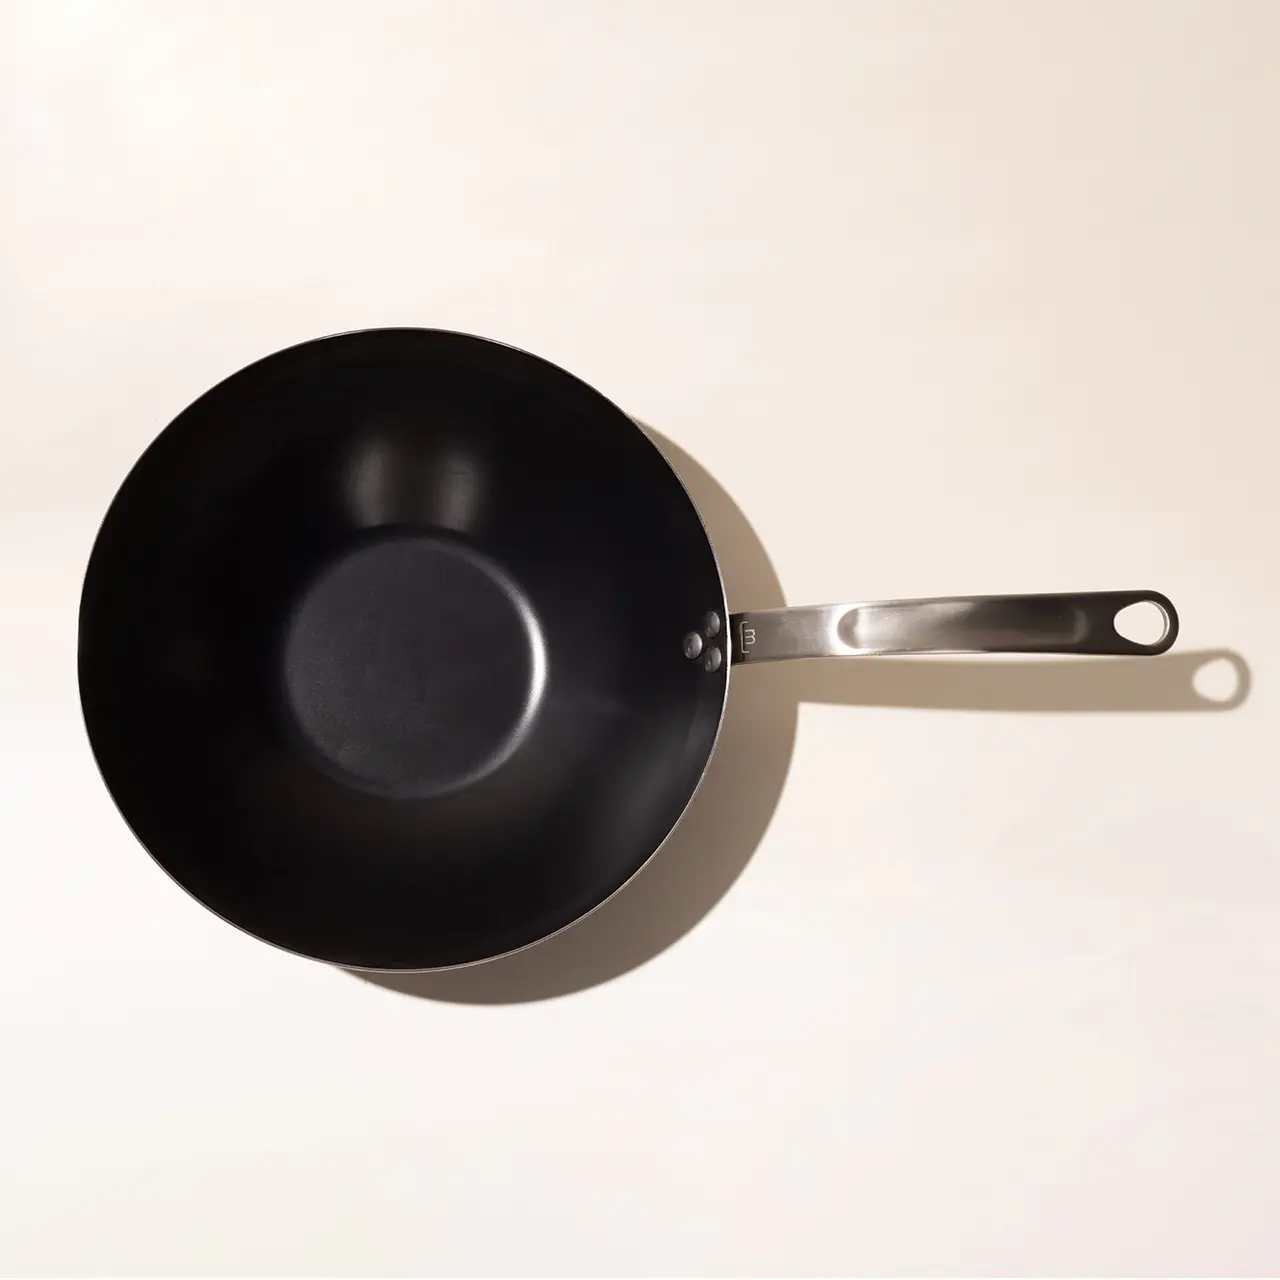 Made In Cookware - 12 Blue Carbon Steel Frying Pan - (Like Cast Iron, but  Better) - Professional Cookware France - Induction Compatible